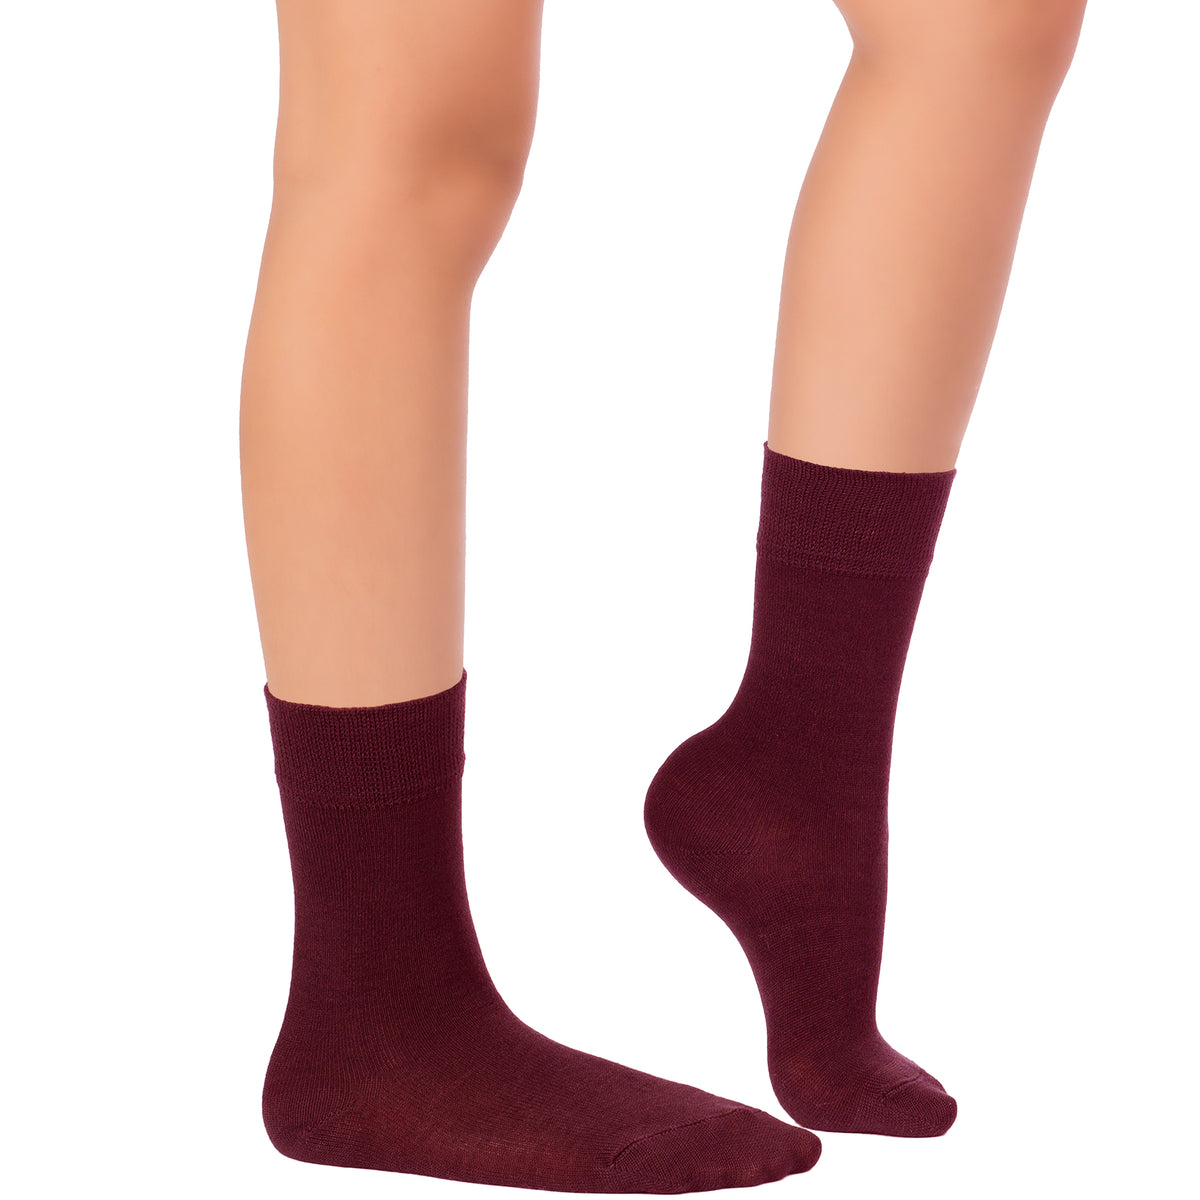 The picture showcases a pair of burgundy socks made of bamboo, intended for kids' dress crew, covering a woman's legs.